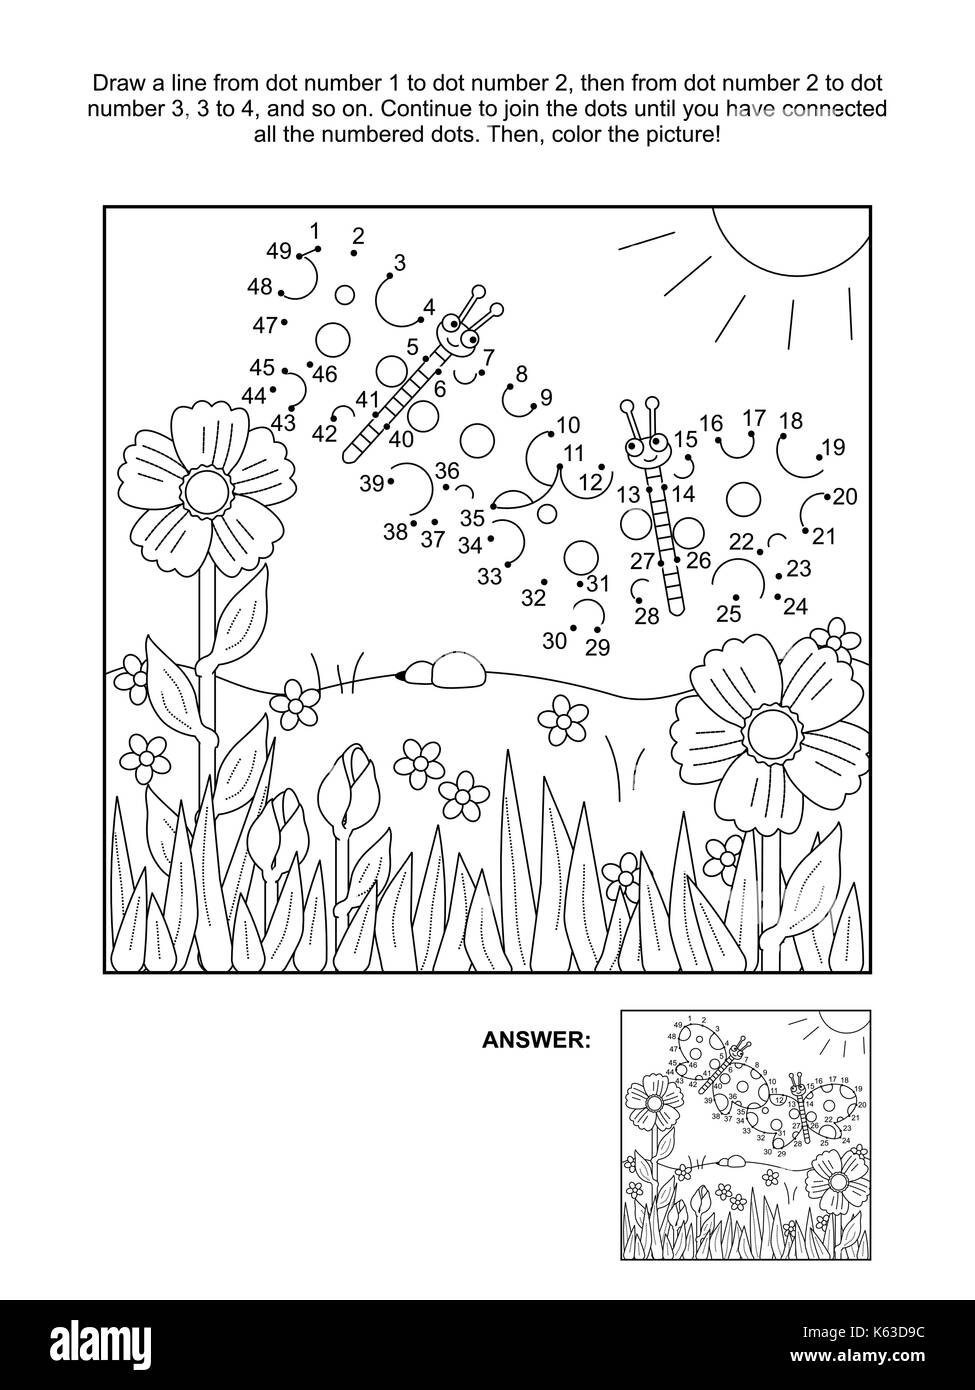 Connect the dots picture puzzle and coloring page spring or summer joy themed with butterflies flowers grass answer included stock vector image art